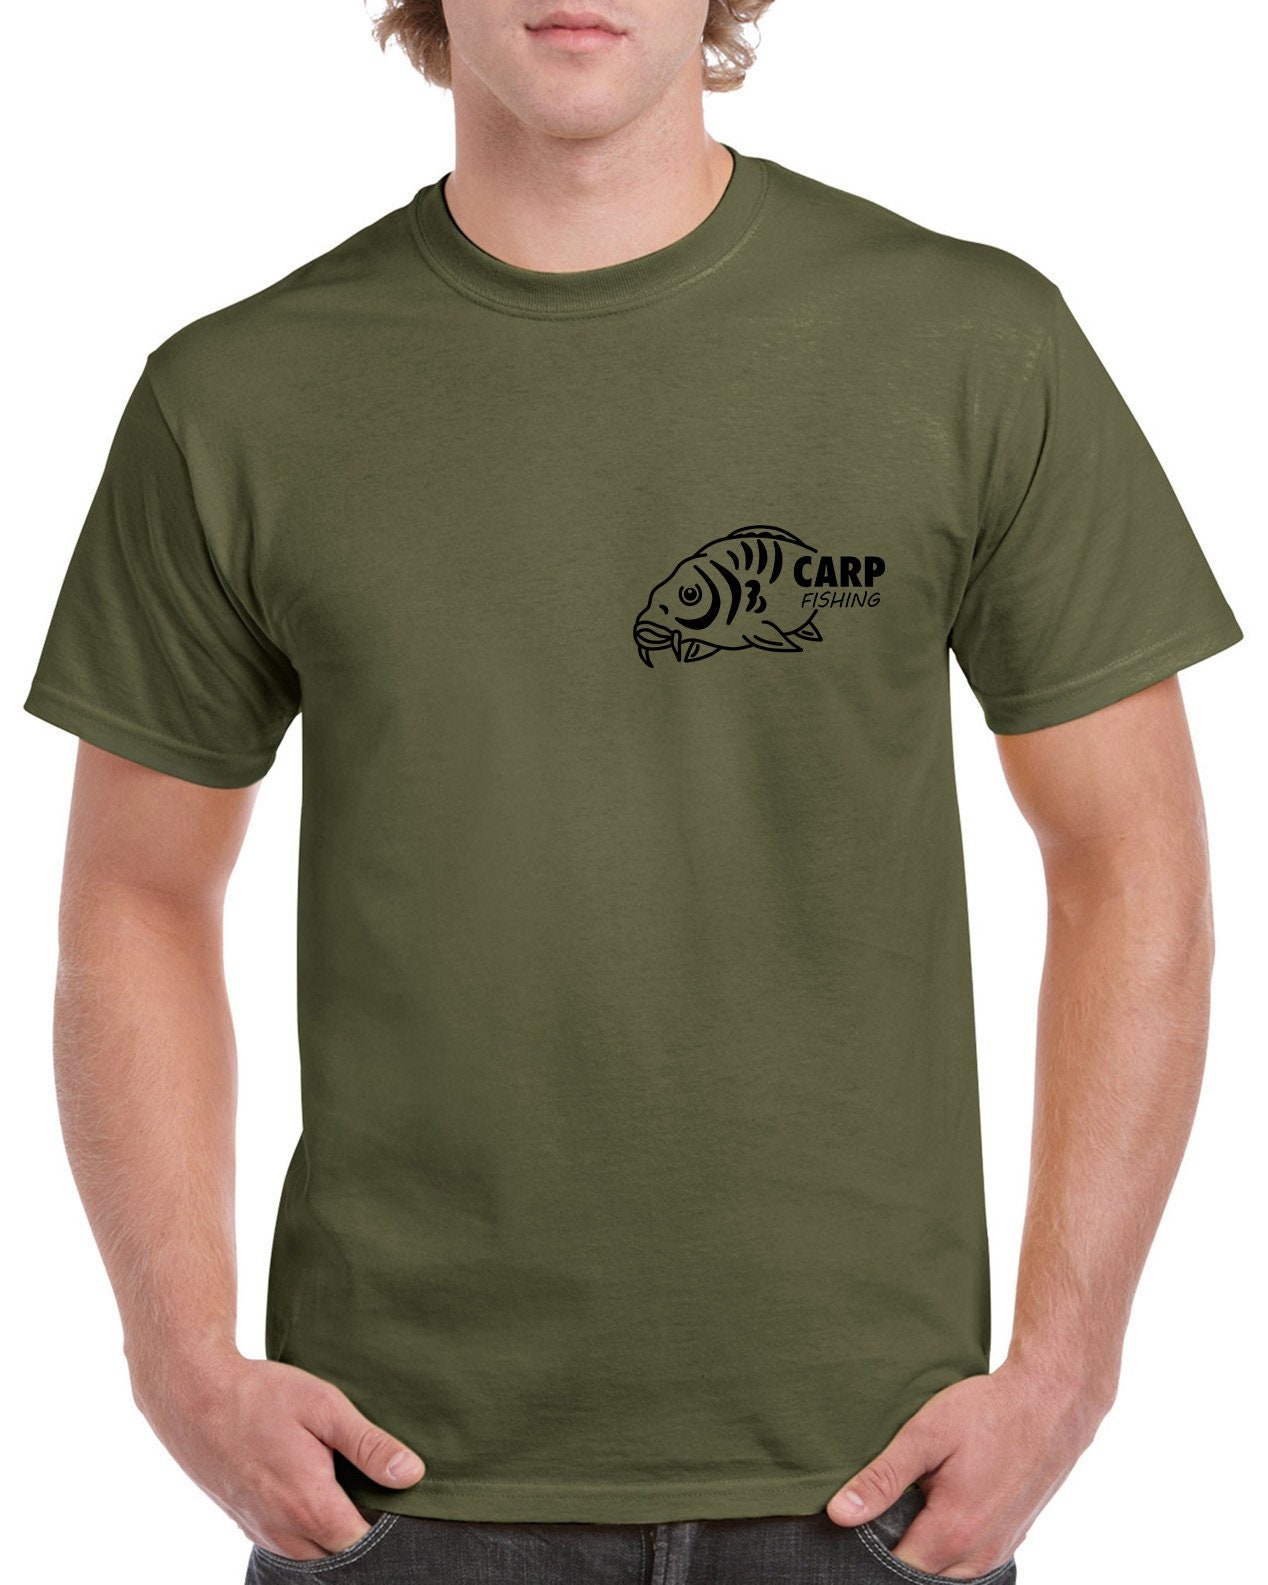 Carp Fishing Green or Black T Shirt with Small Heat Press Vinyl Logo in Choice of Colour Ideal Gift for Fisherman. - Small Carp Fishing